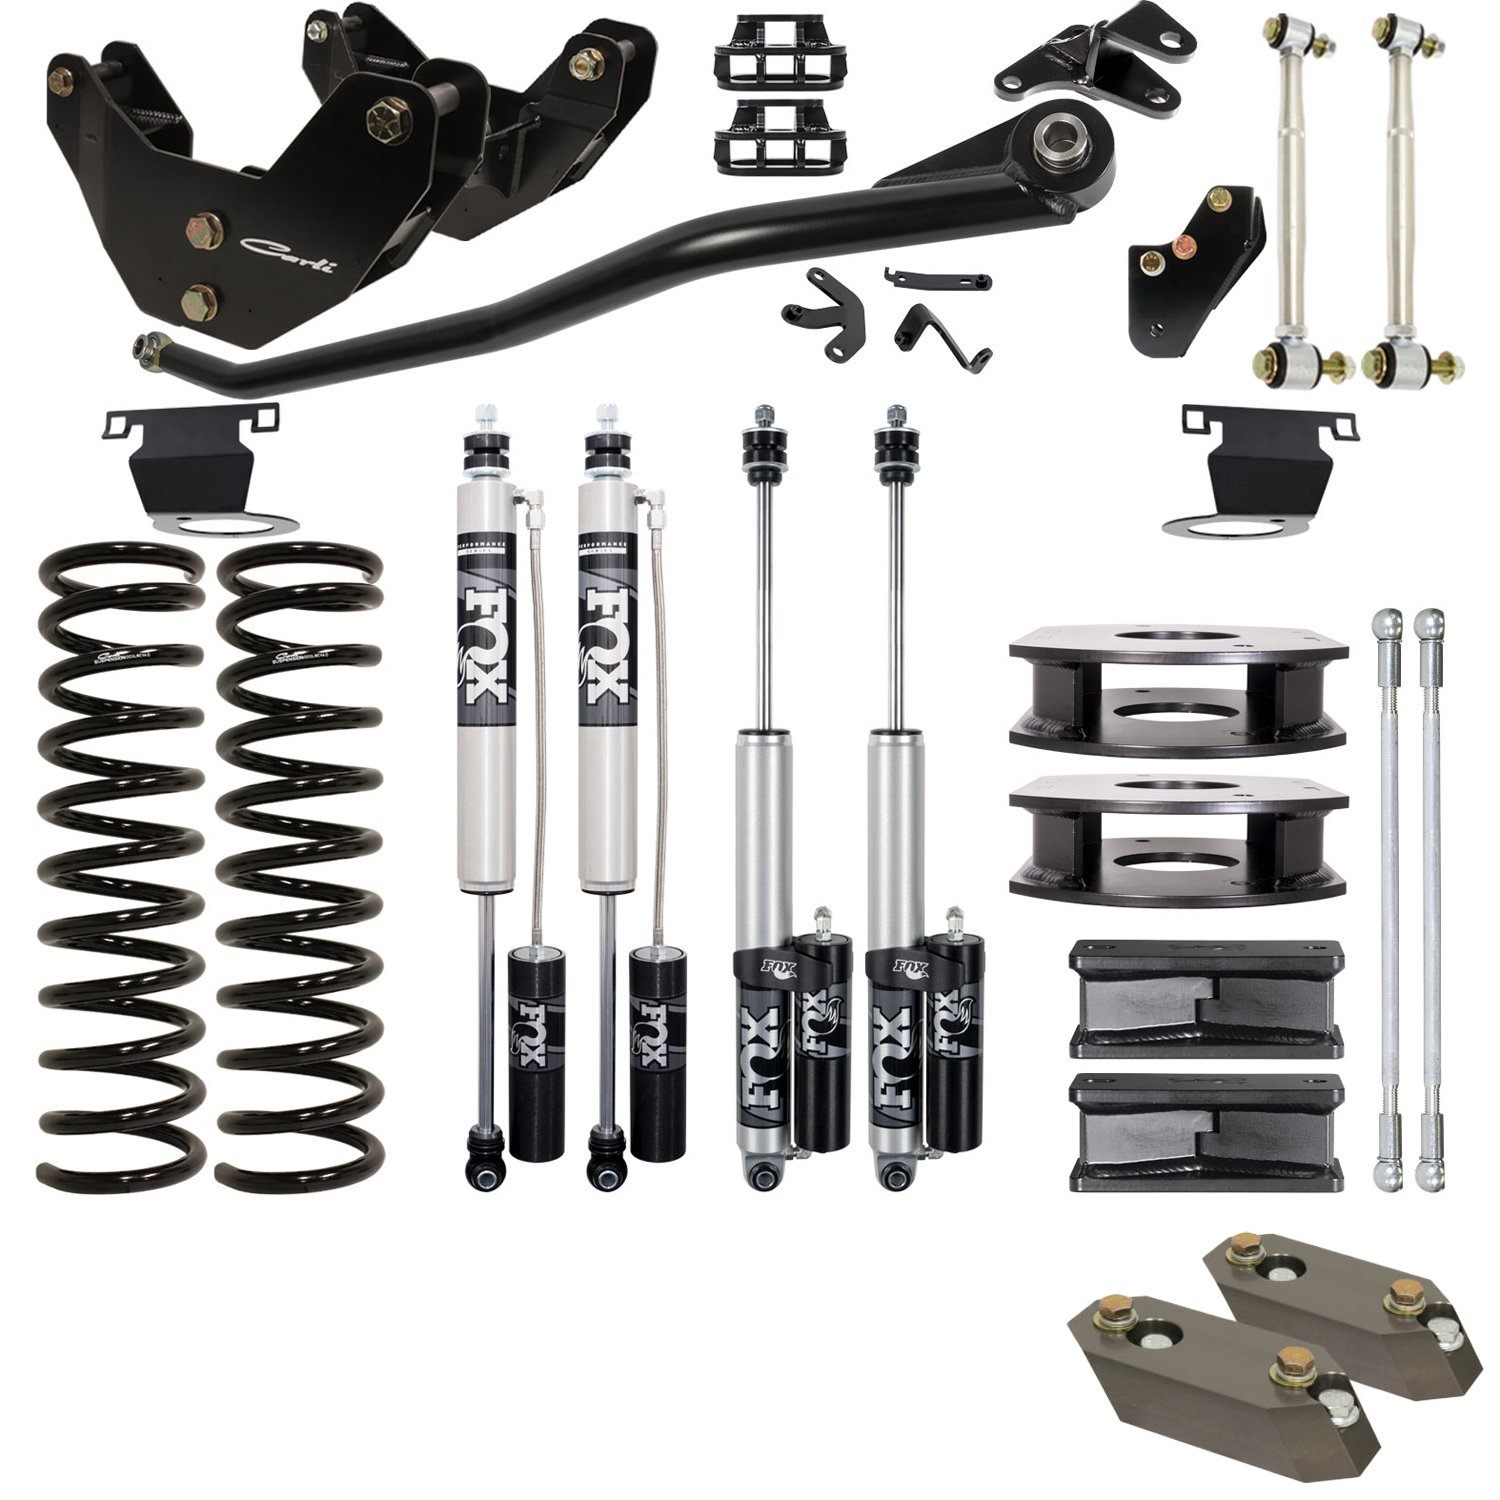 '14-18 Ram 2500 Air Ride Backcountry System-3.25" Lift Suspension Carli Suspension parts